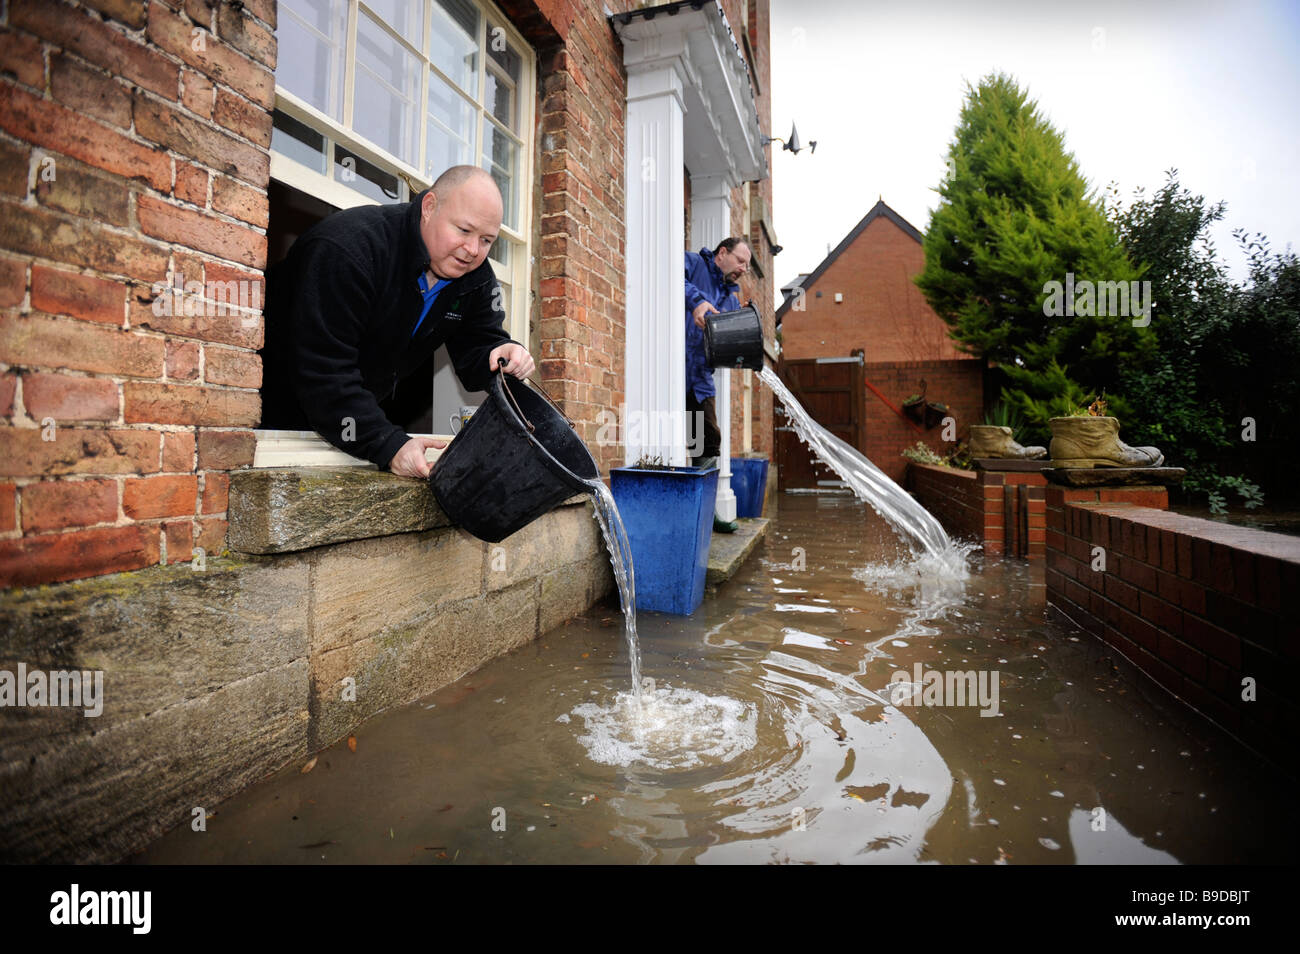 RESIDENTS BAIL FLOODWATER FROM THEIR HOUSE IN STONEHOUSE NEAR STROUD GLOUCESTERSHIRE UK JAN 2008 Stock Photo